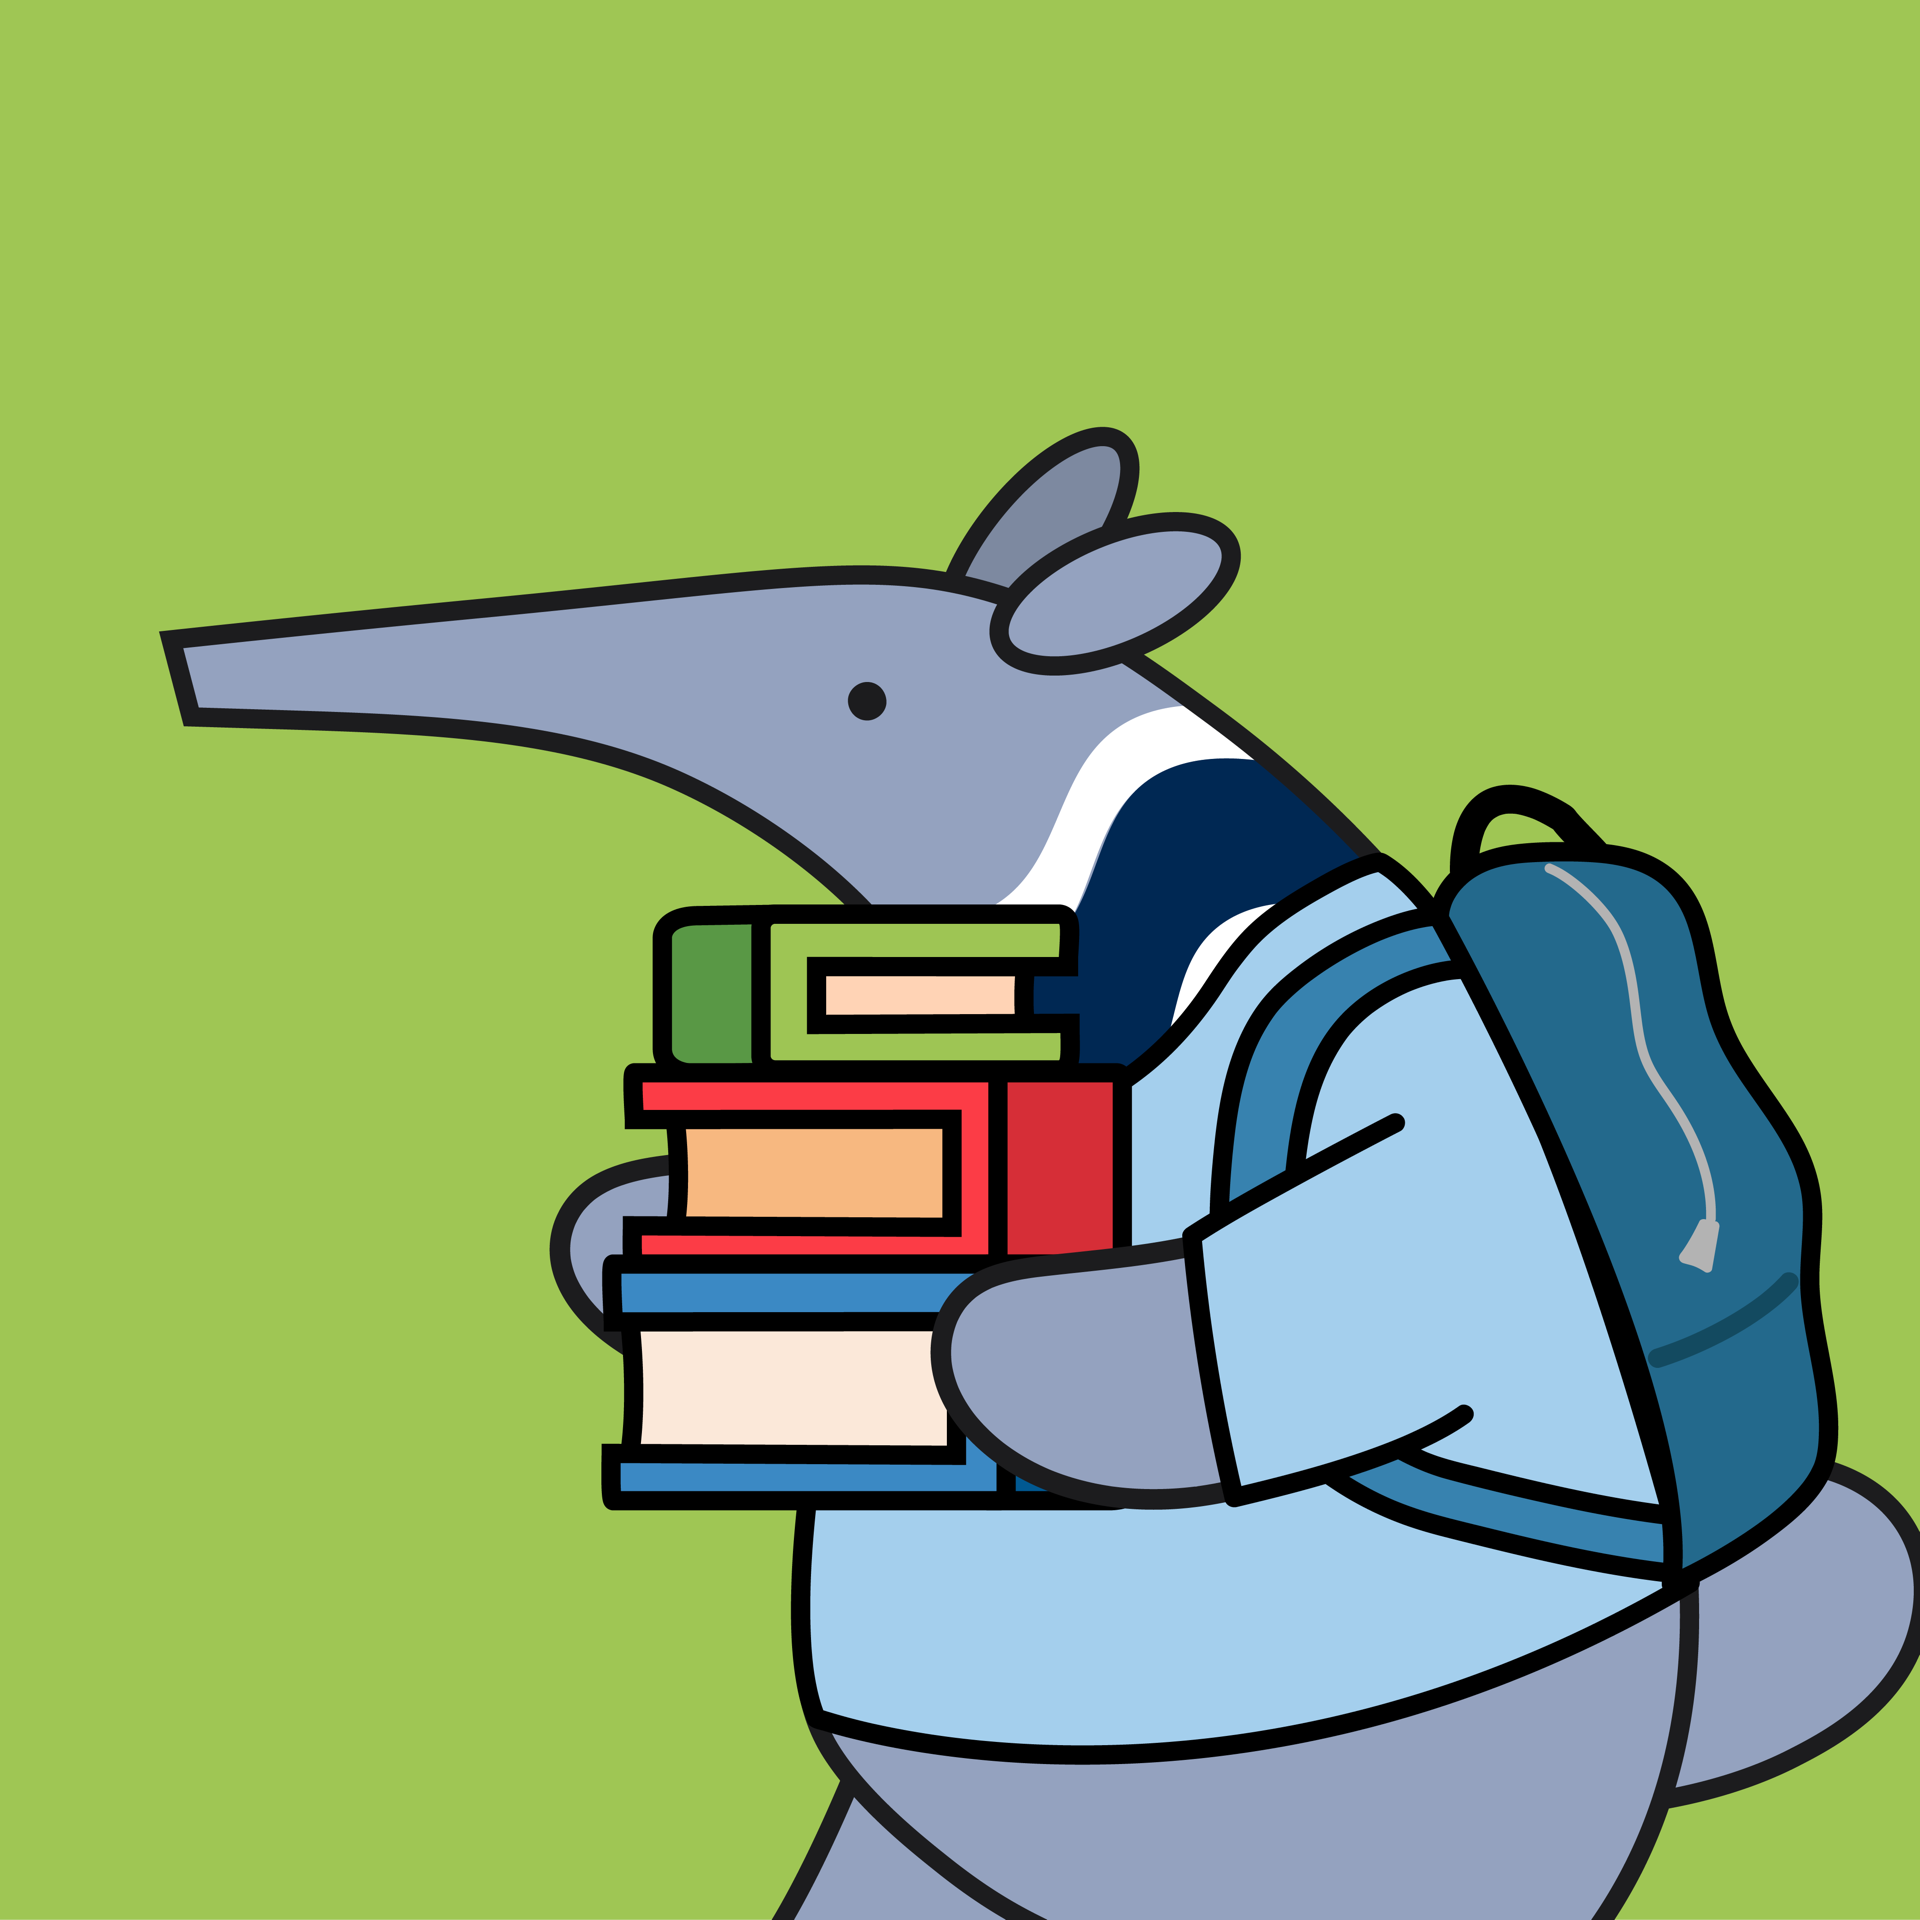 Student Anteater carrying books